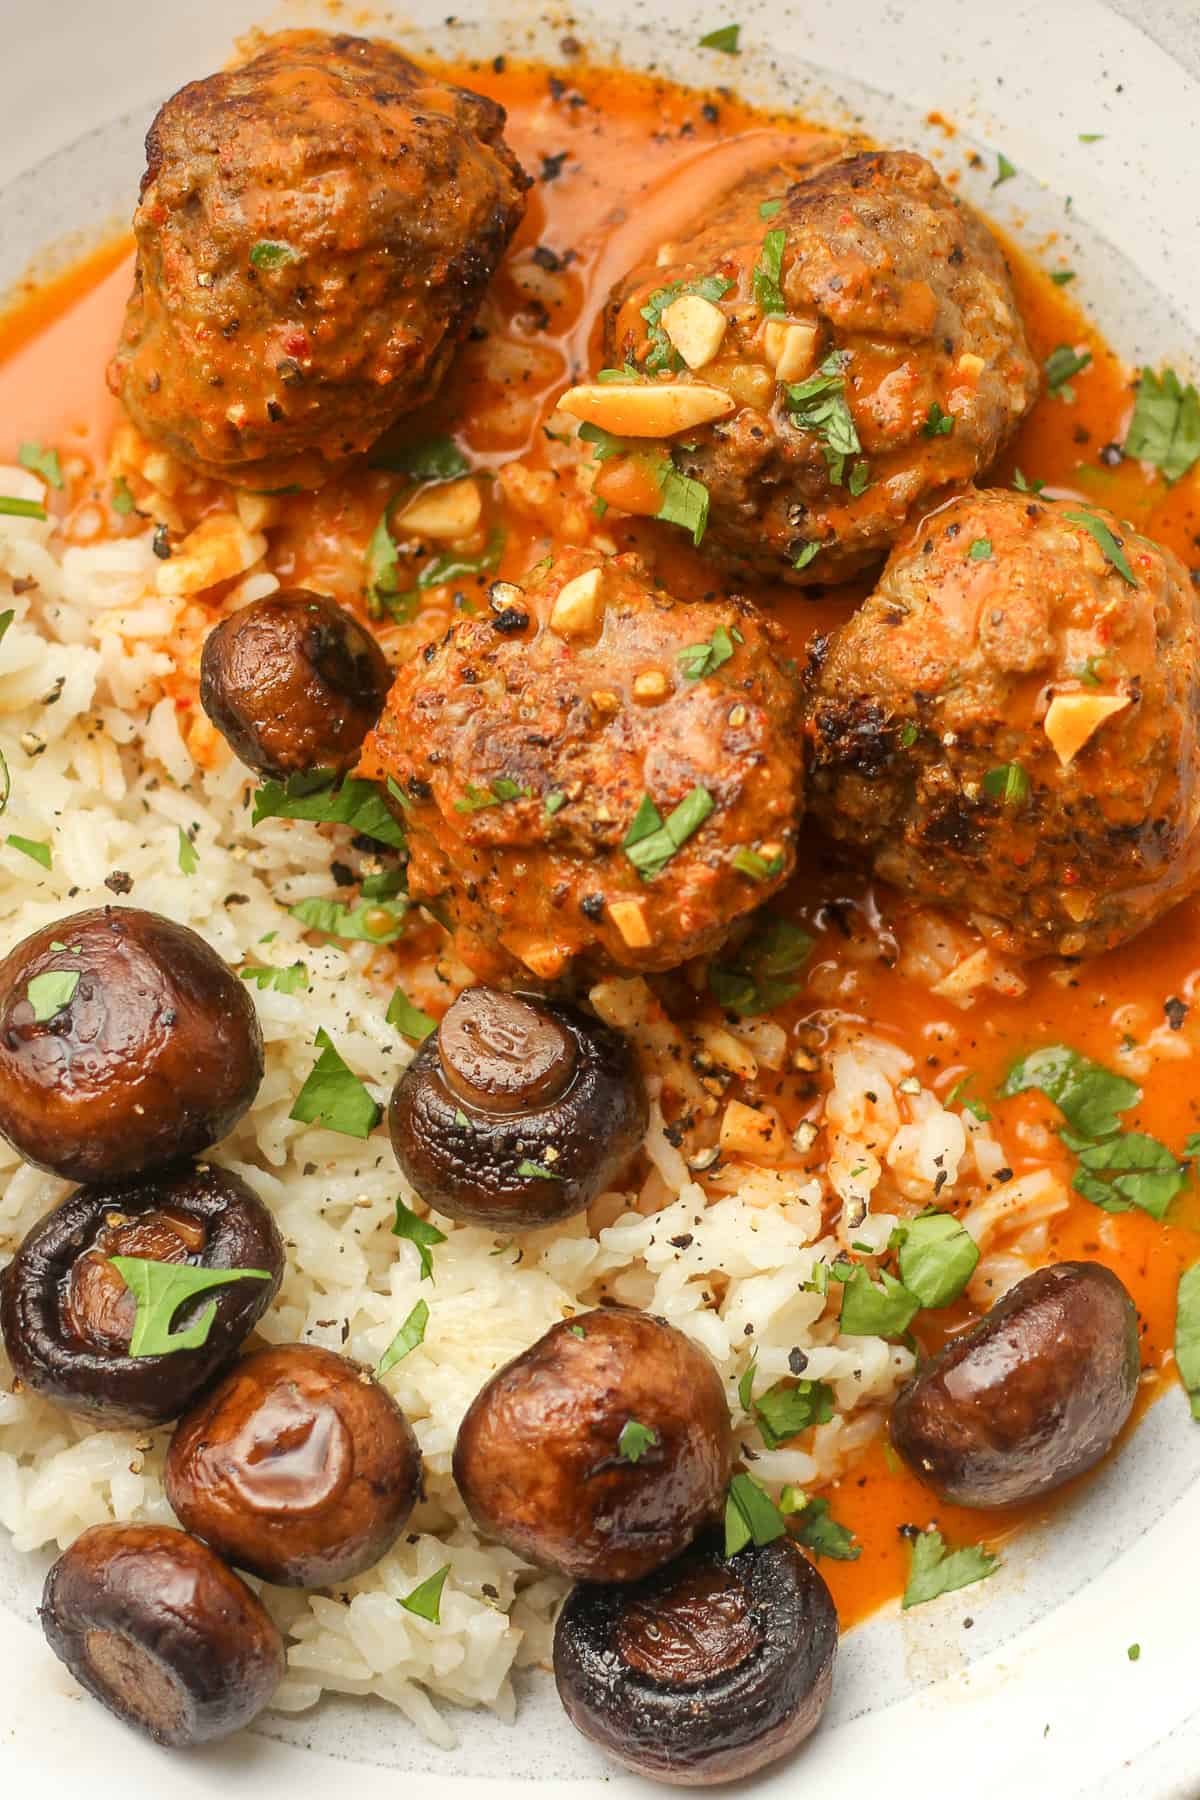 Closeup on a bowl of rice, mushrooms, and curried meatballs.